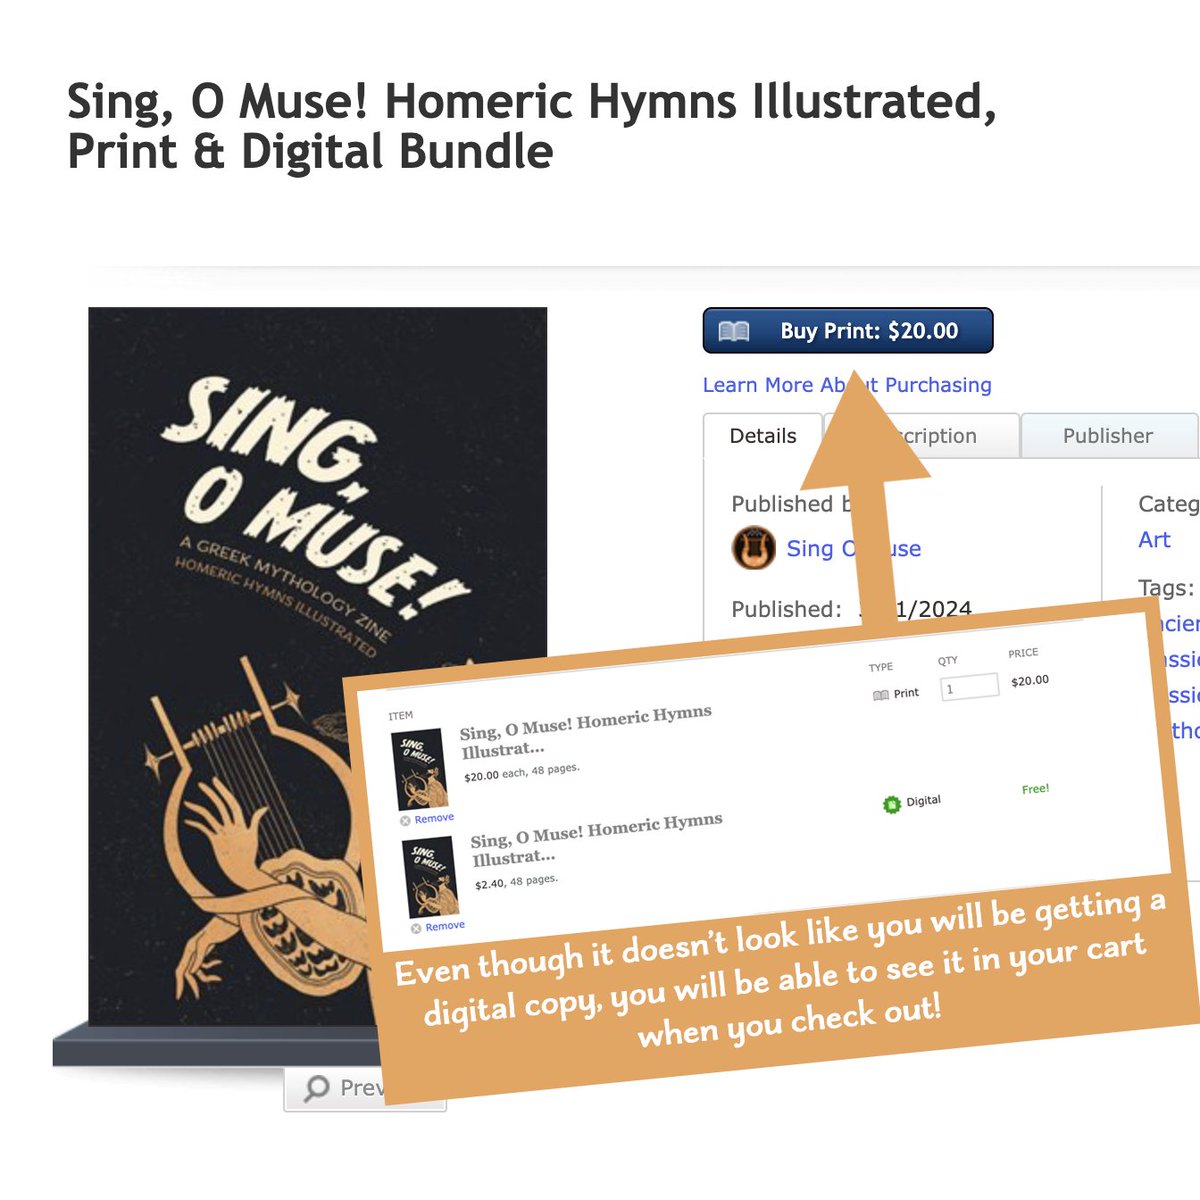 Sing, O Muse! A Greek Mythology Zine is officially available to purchase! Please visit the link in our bio to purchase copy today! Available in print, digital, or a print/digital bundle! #SingOMuseZine